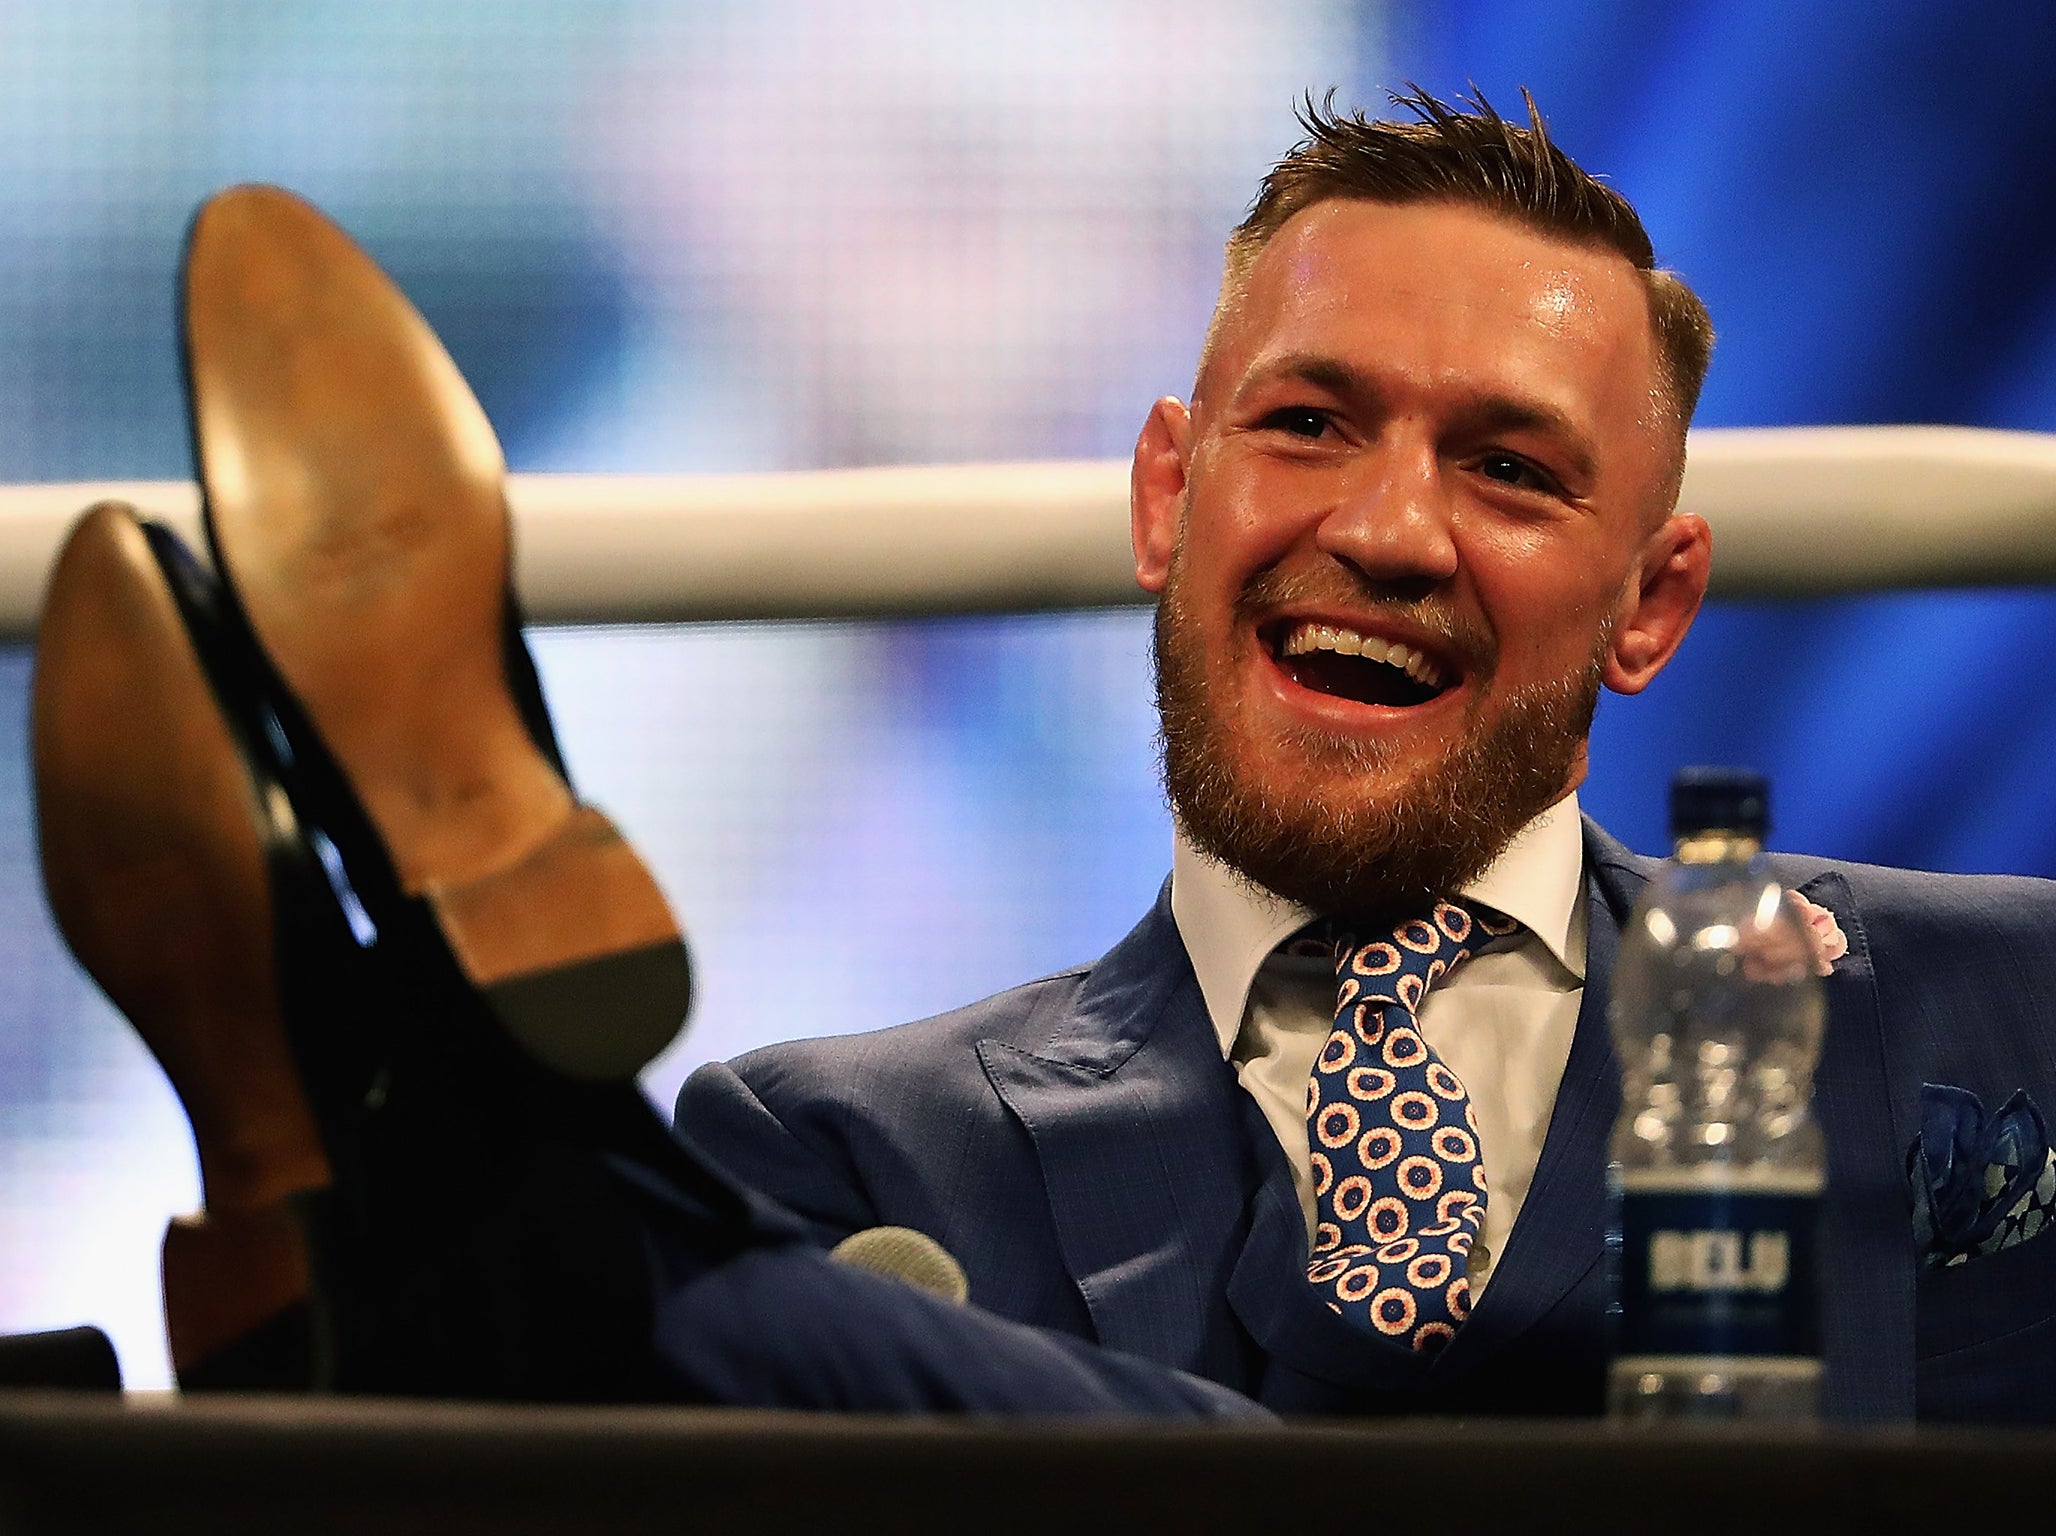 McGregor is open to the idea of rematching Mayweather in the UFC